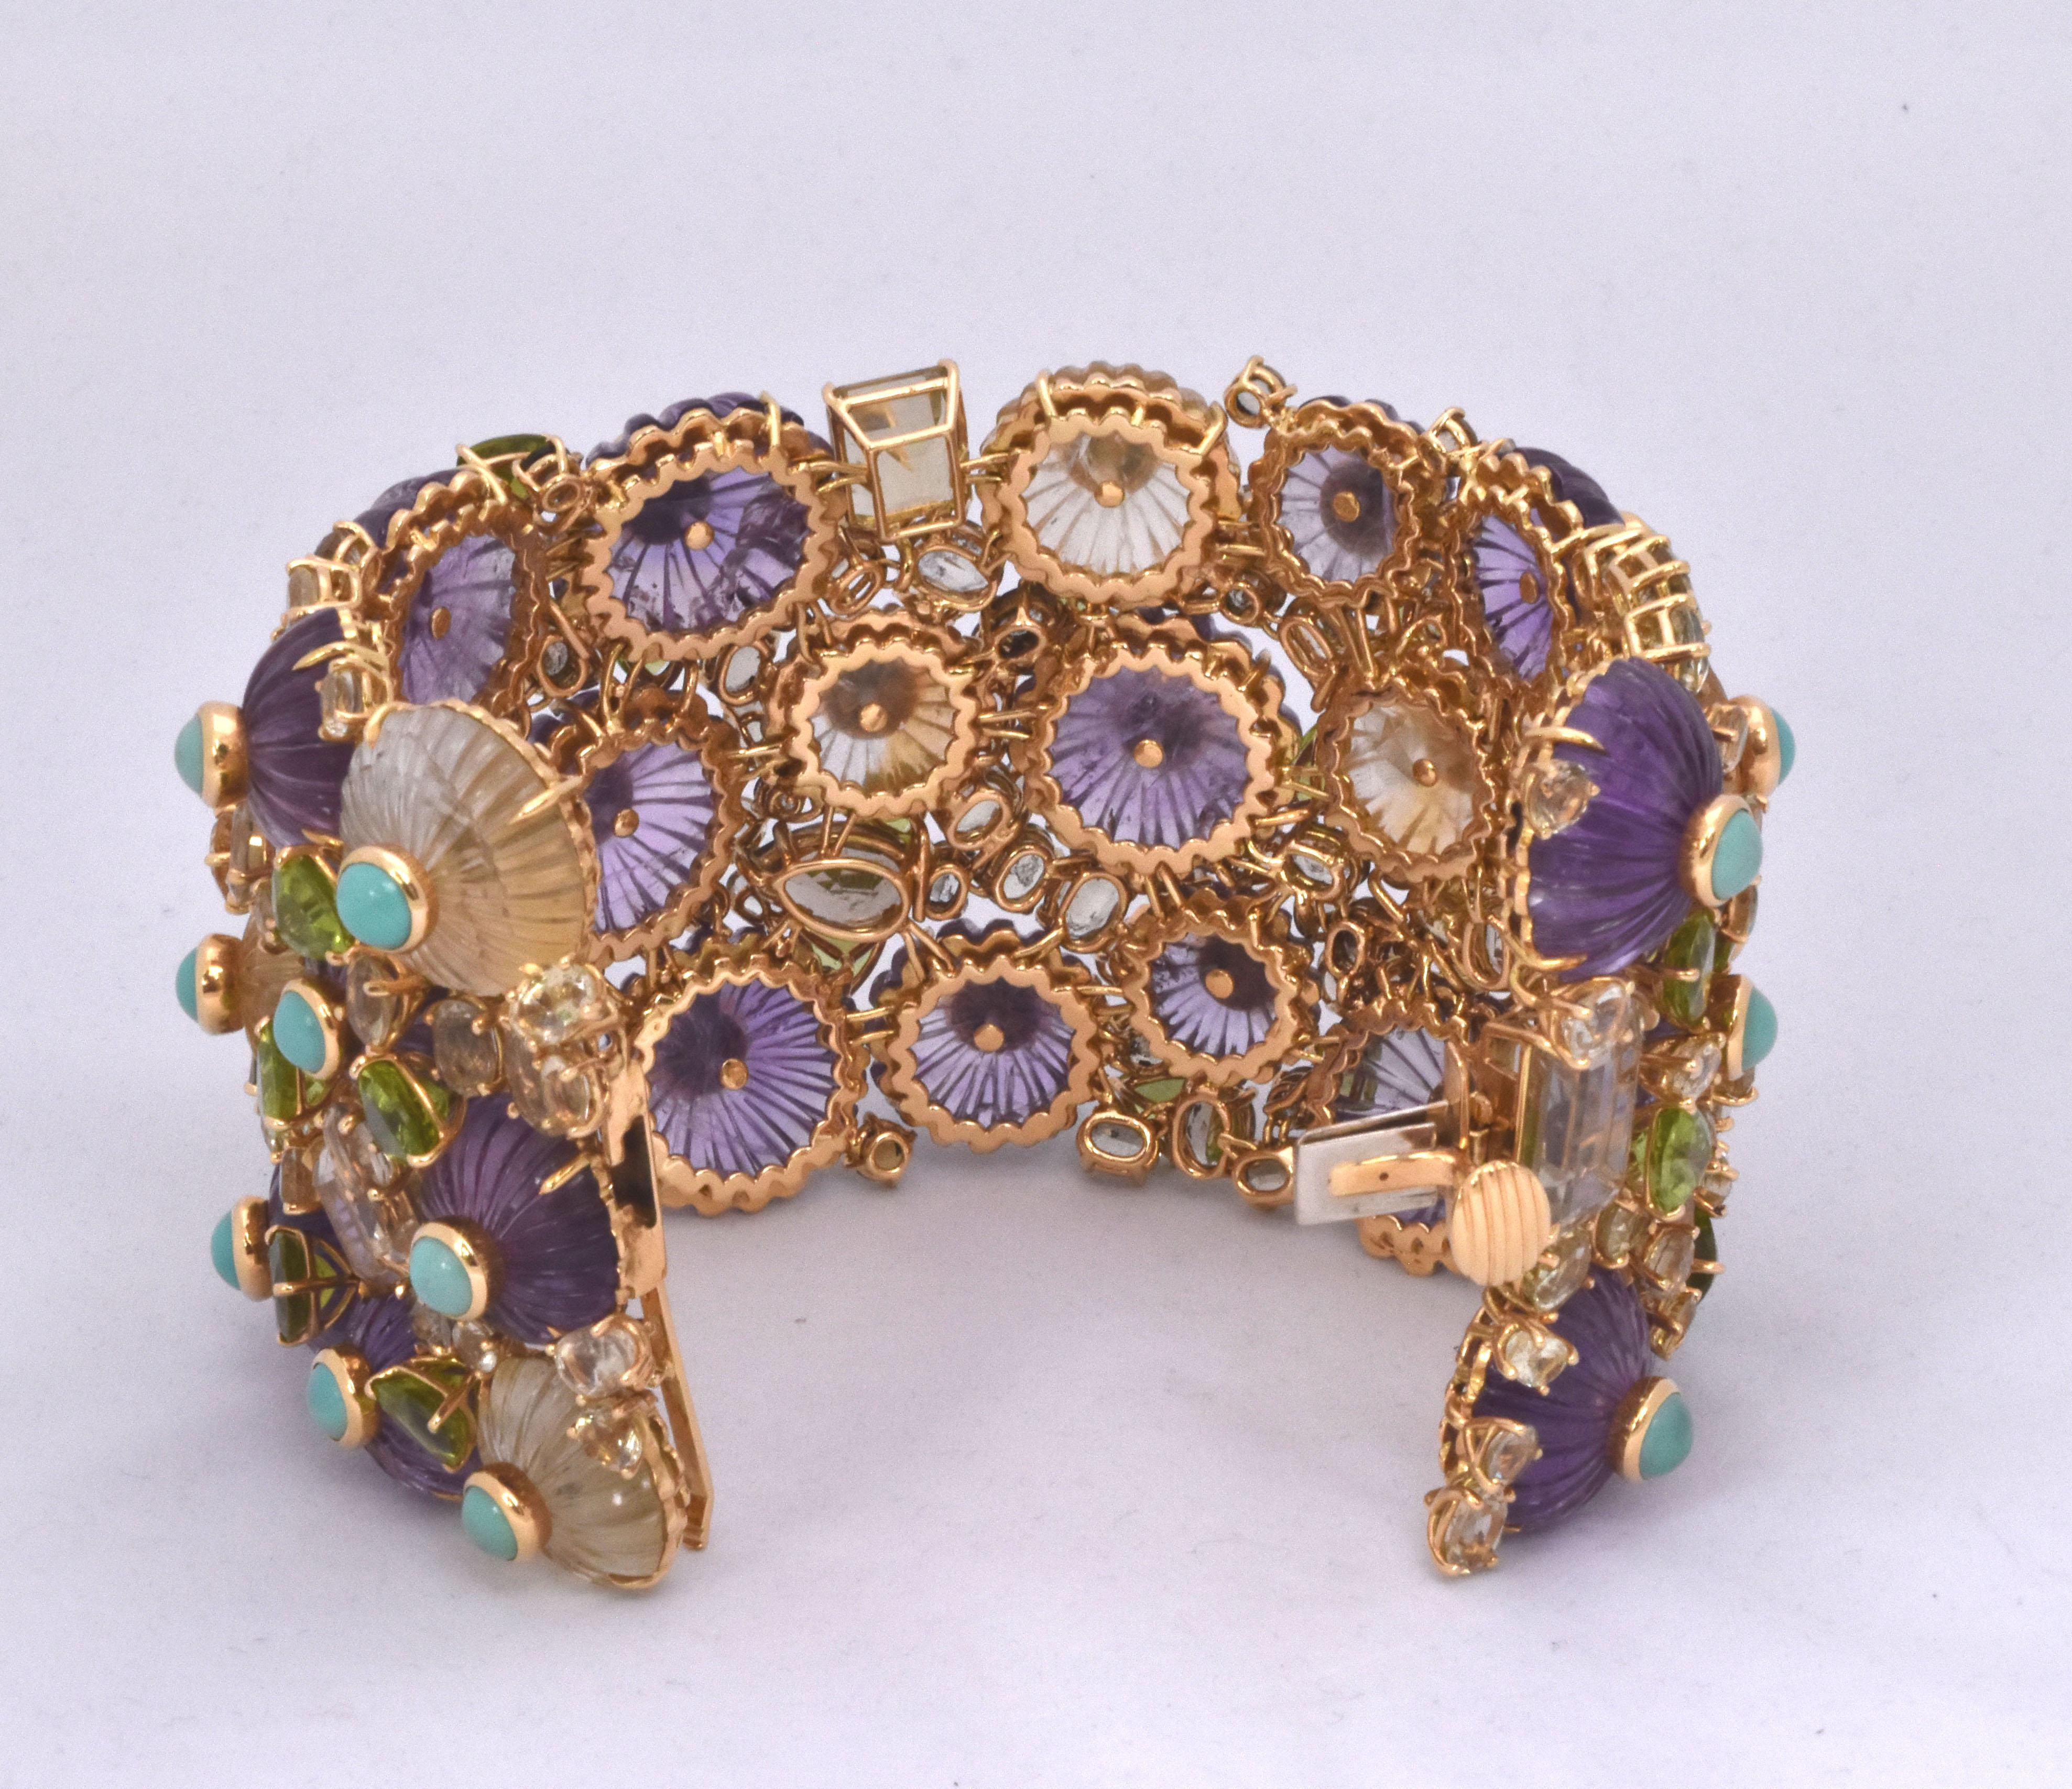 Contemporary Tony Duquette Signed Amethyst Citrine Peridot Turquoise Gold Statement Bracelet